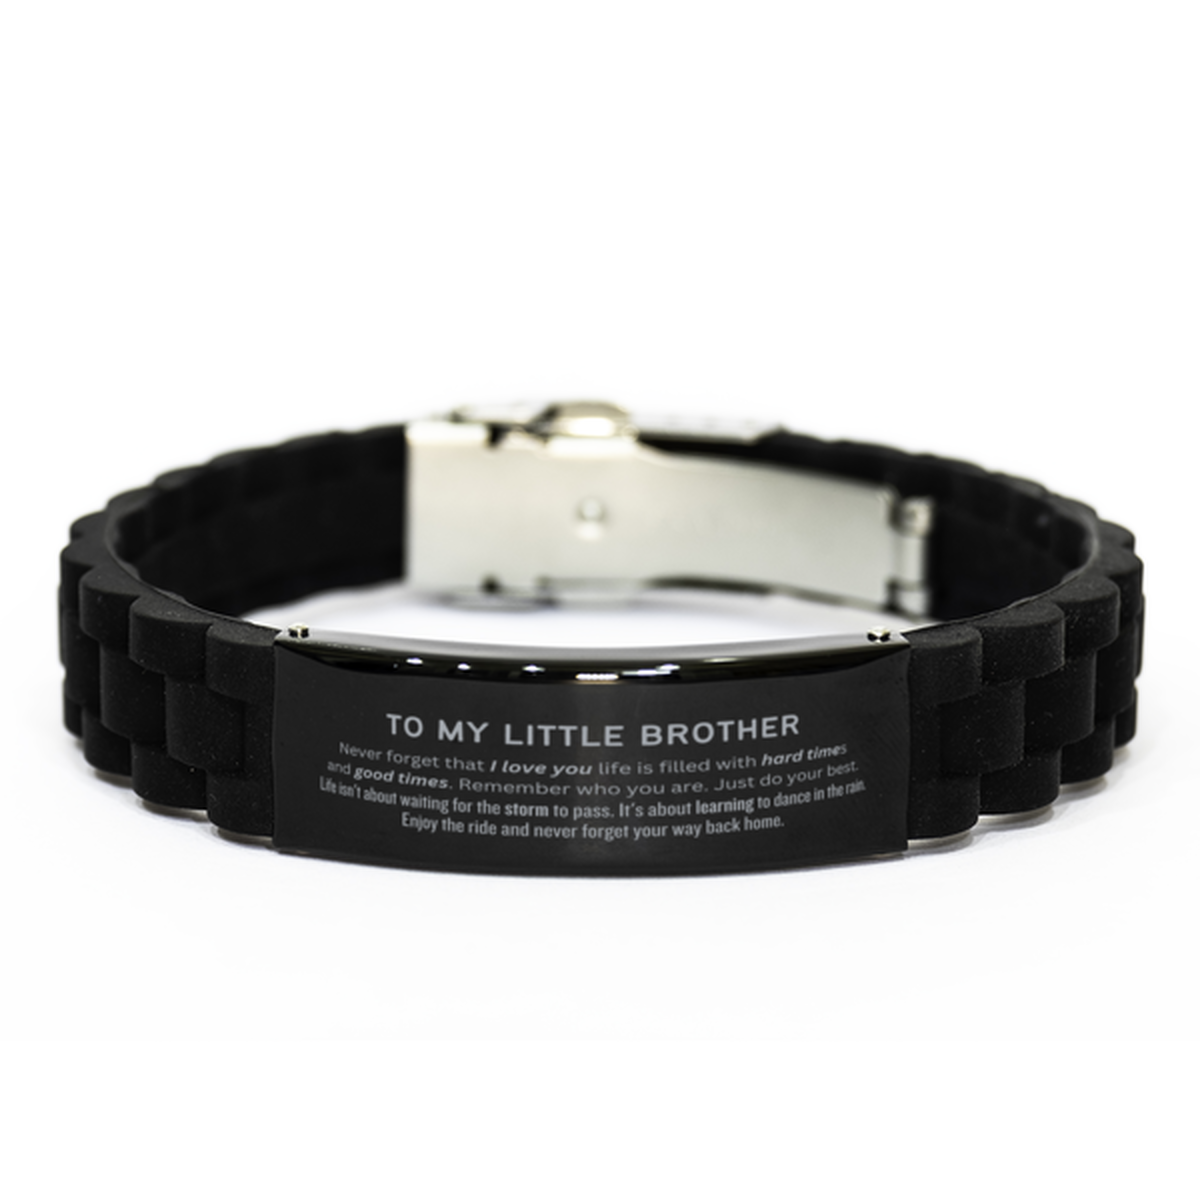 Christmas Little Brother Black Glidelock Clasp Bracelet Gifts, To My Little Brother Birthday Thank You Gifts For Little Brother, Graduation Unique Gifts For Little Brother To My Little Brother Never forget that I love you life is filled with hard times an